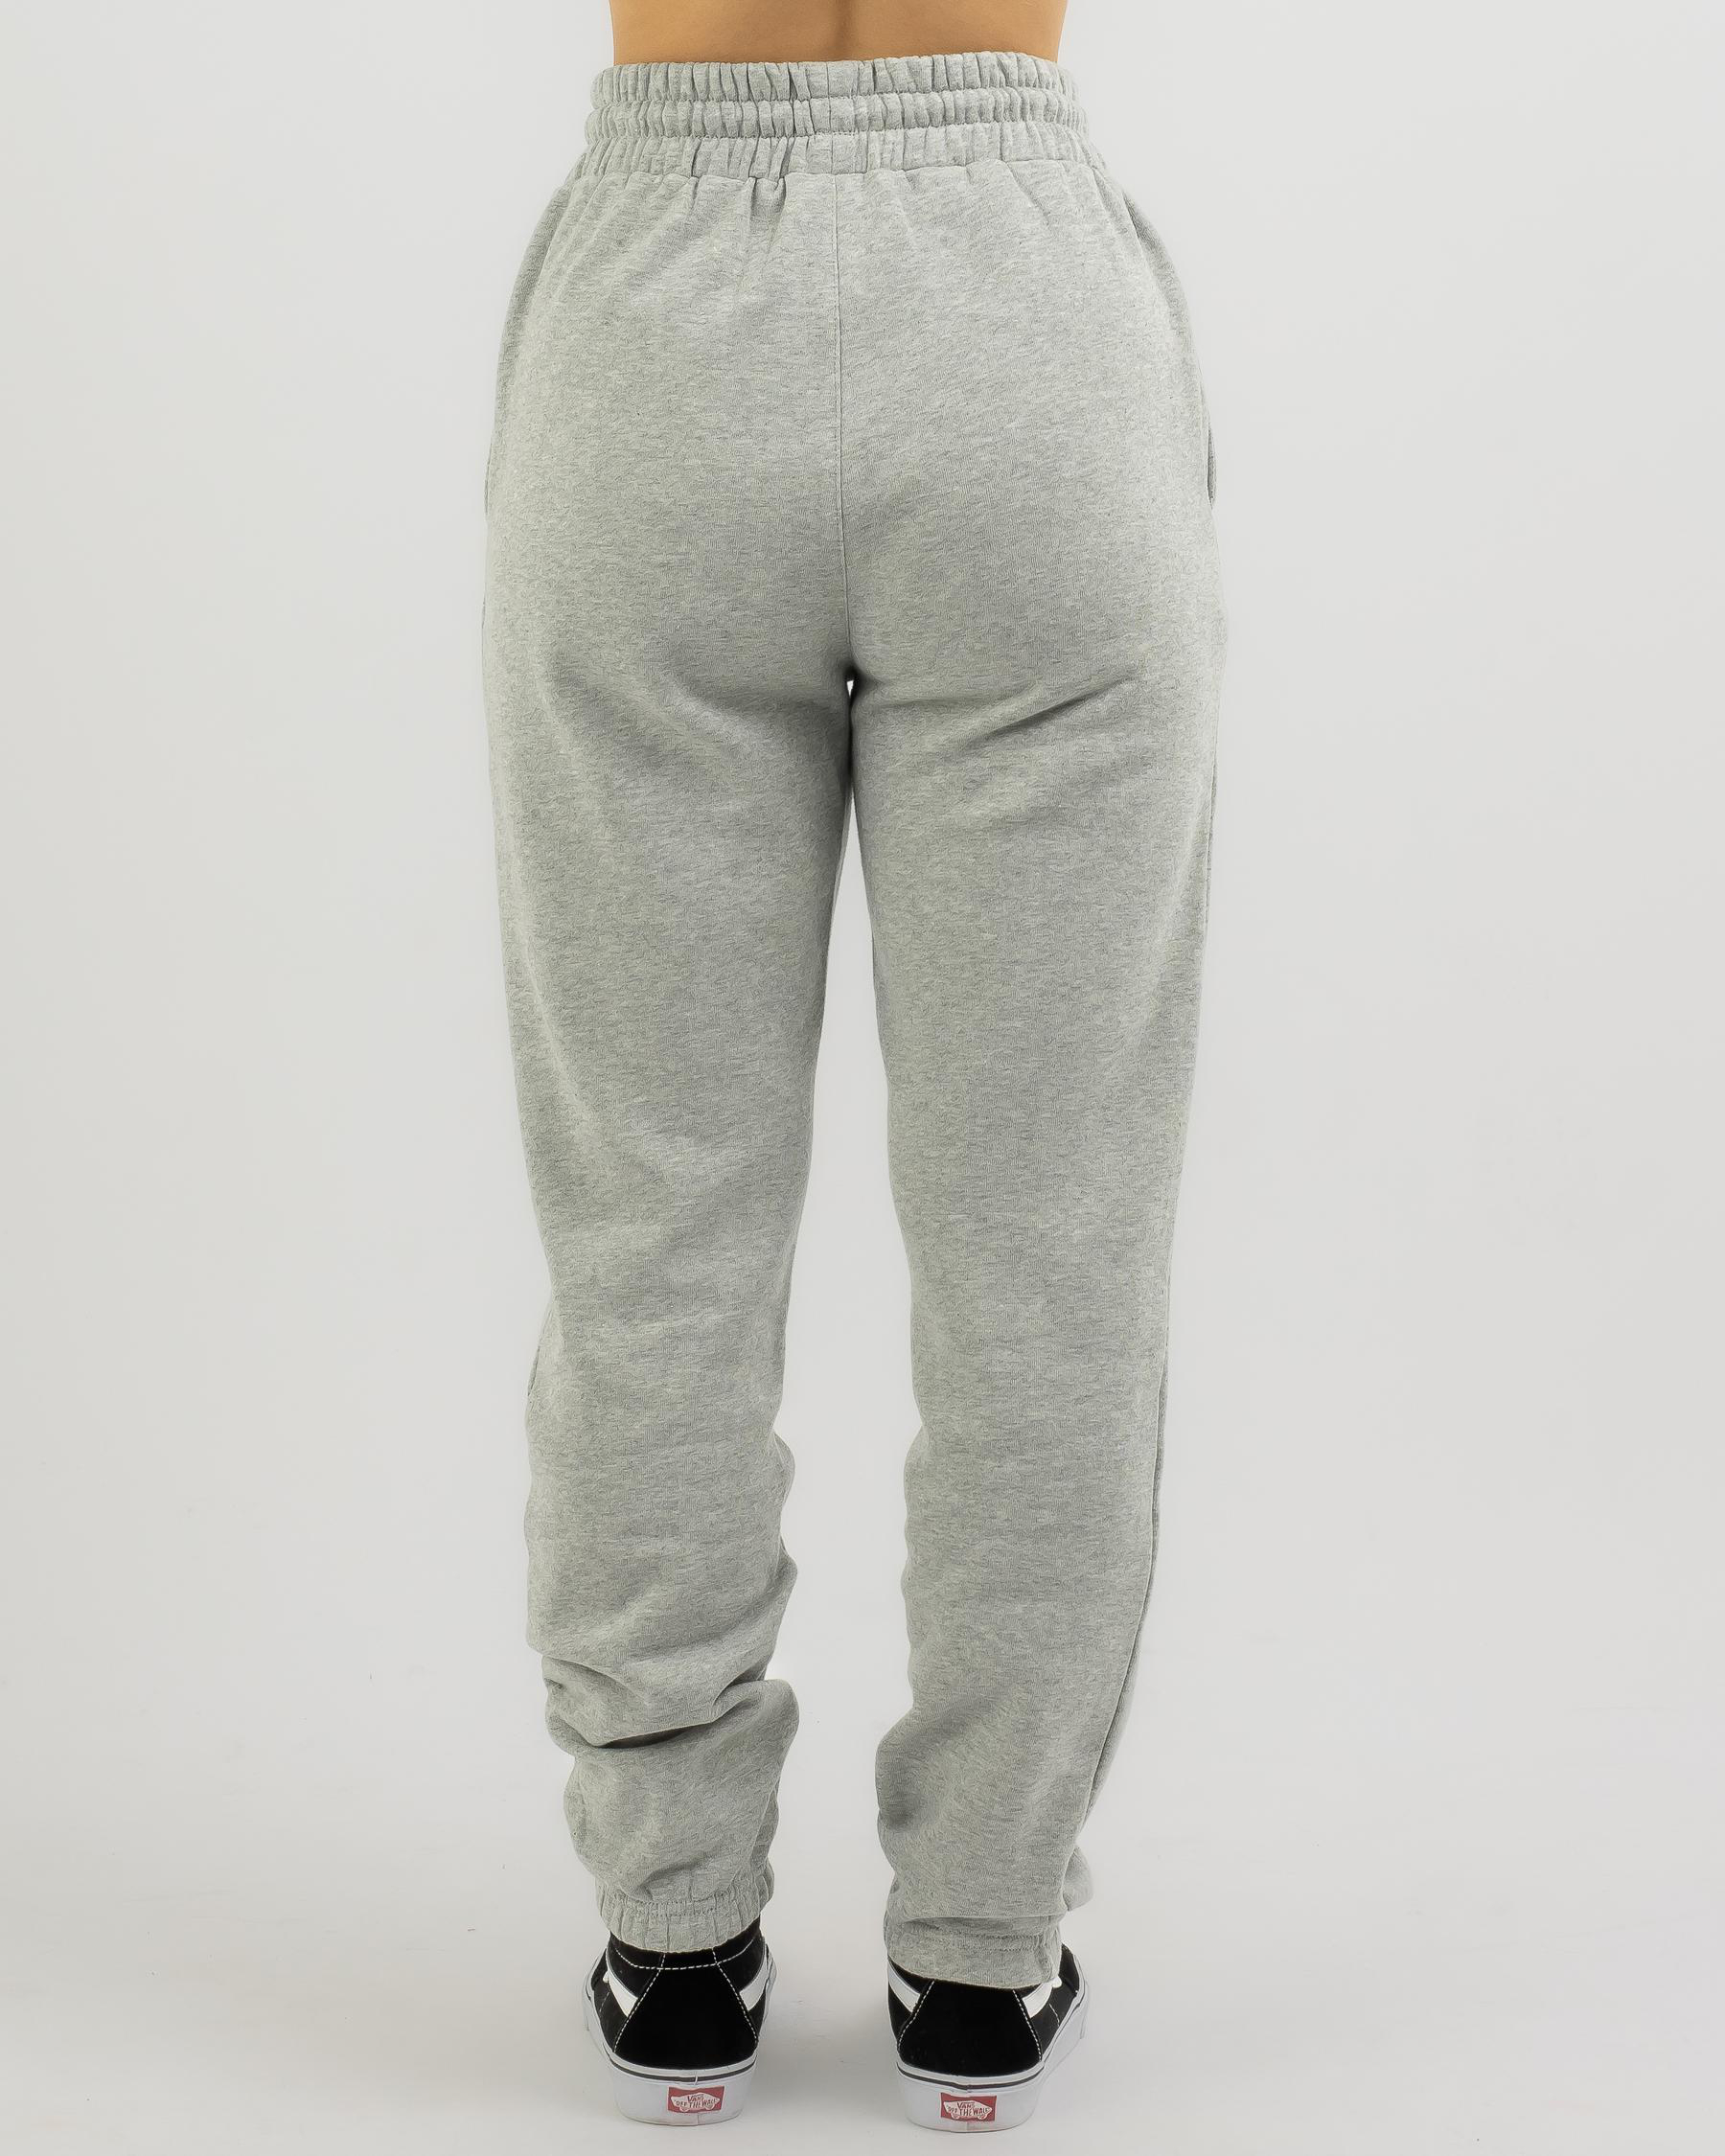 Russell Athletic Midfielder Track Pants In Grey Marle - FREE* Shipping &  Easy Returns - City Beach United States